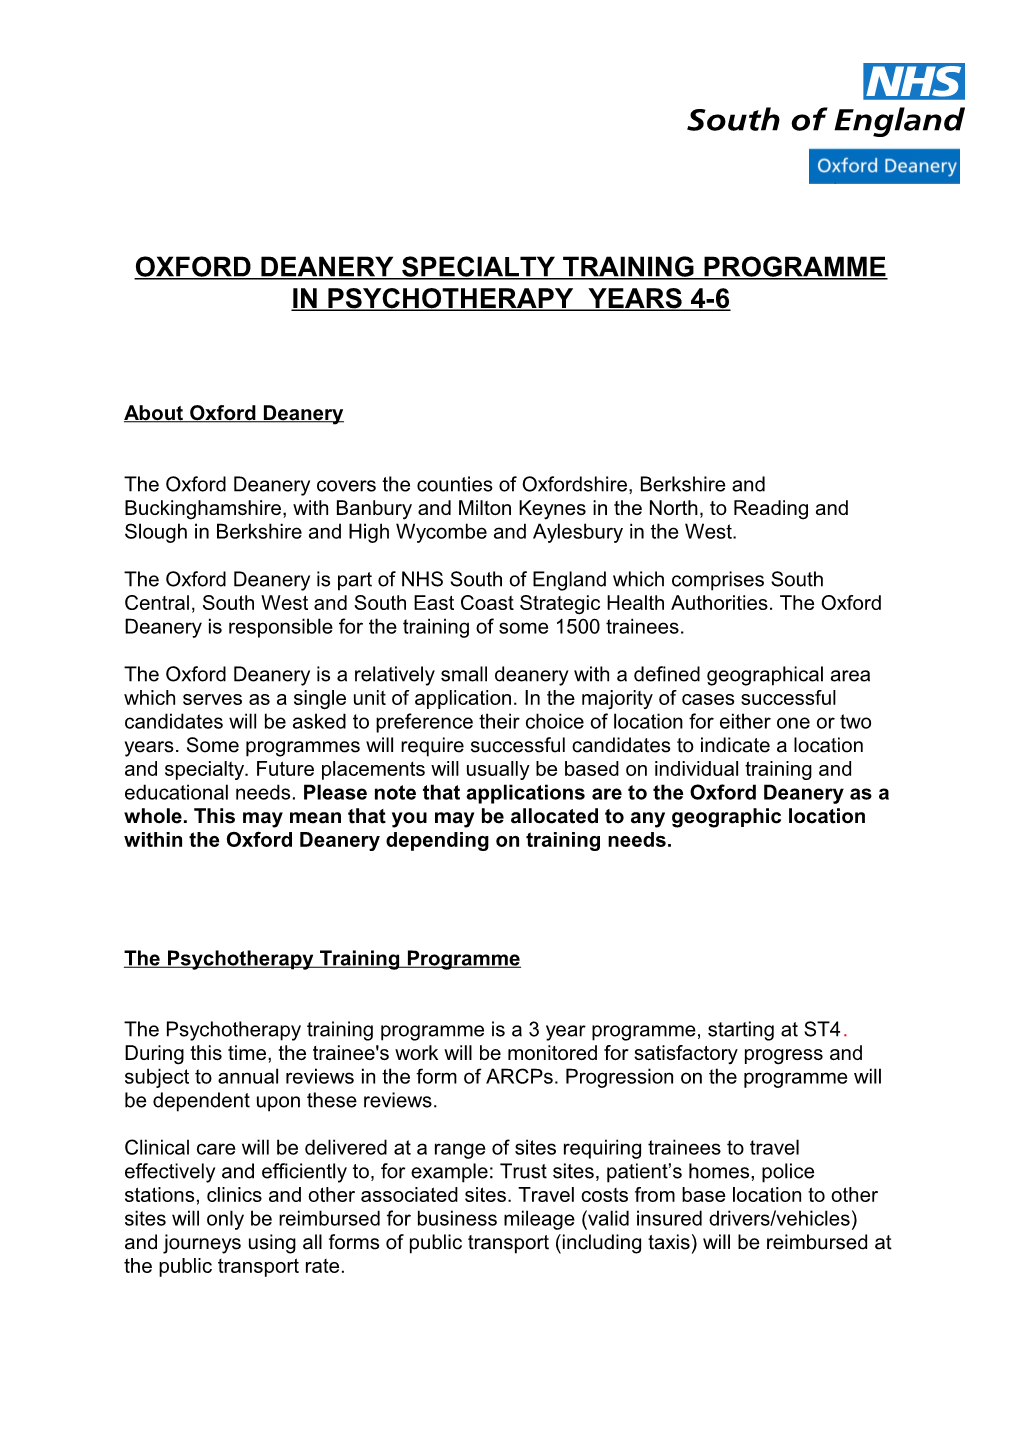 Oxford Deanery Specialty Training Programme in Insert Specialty